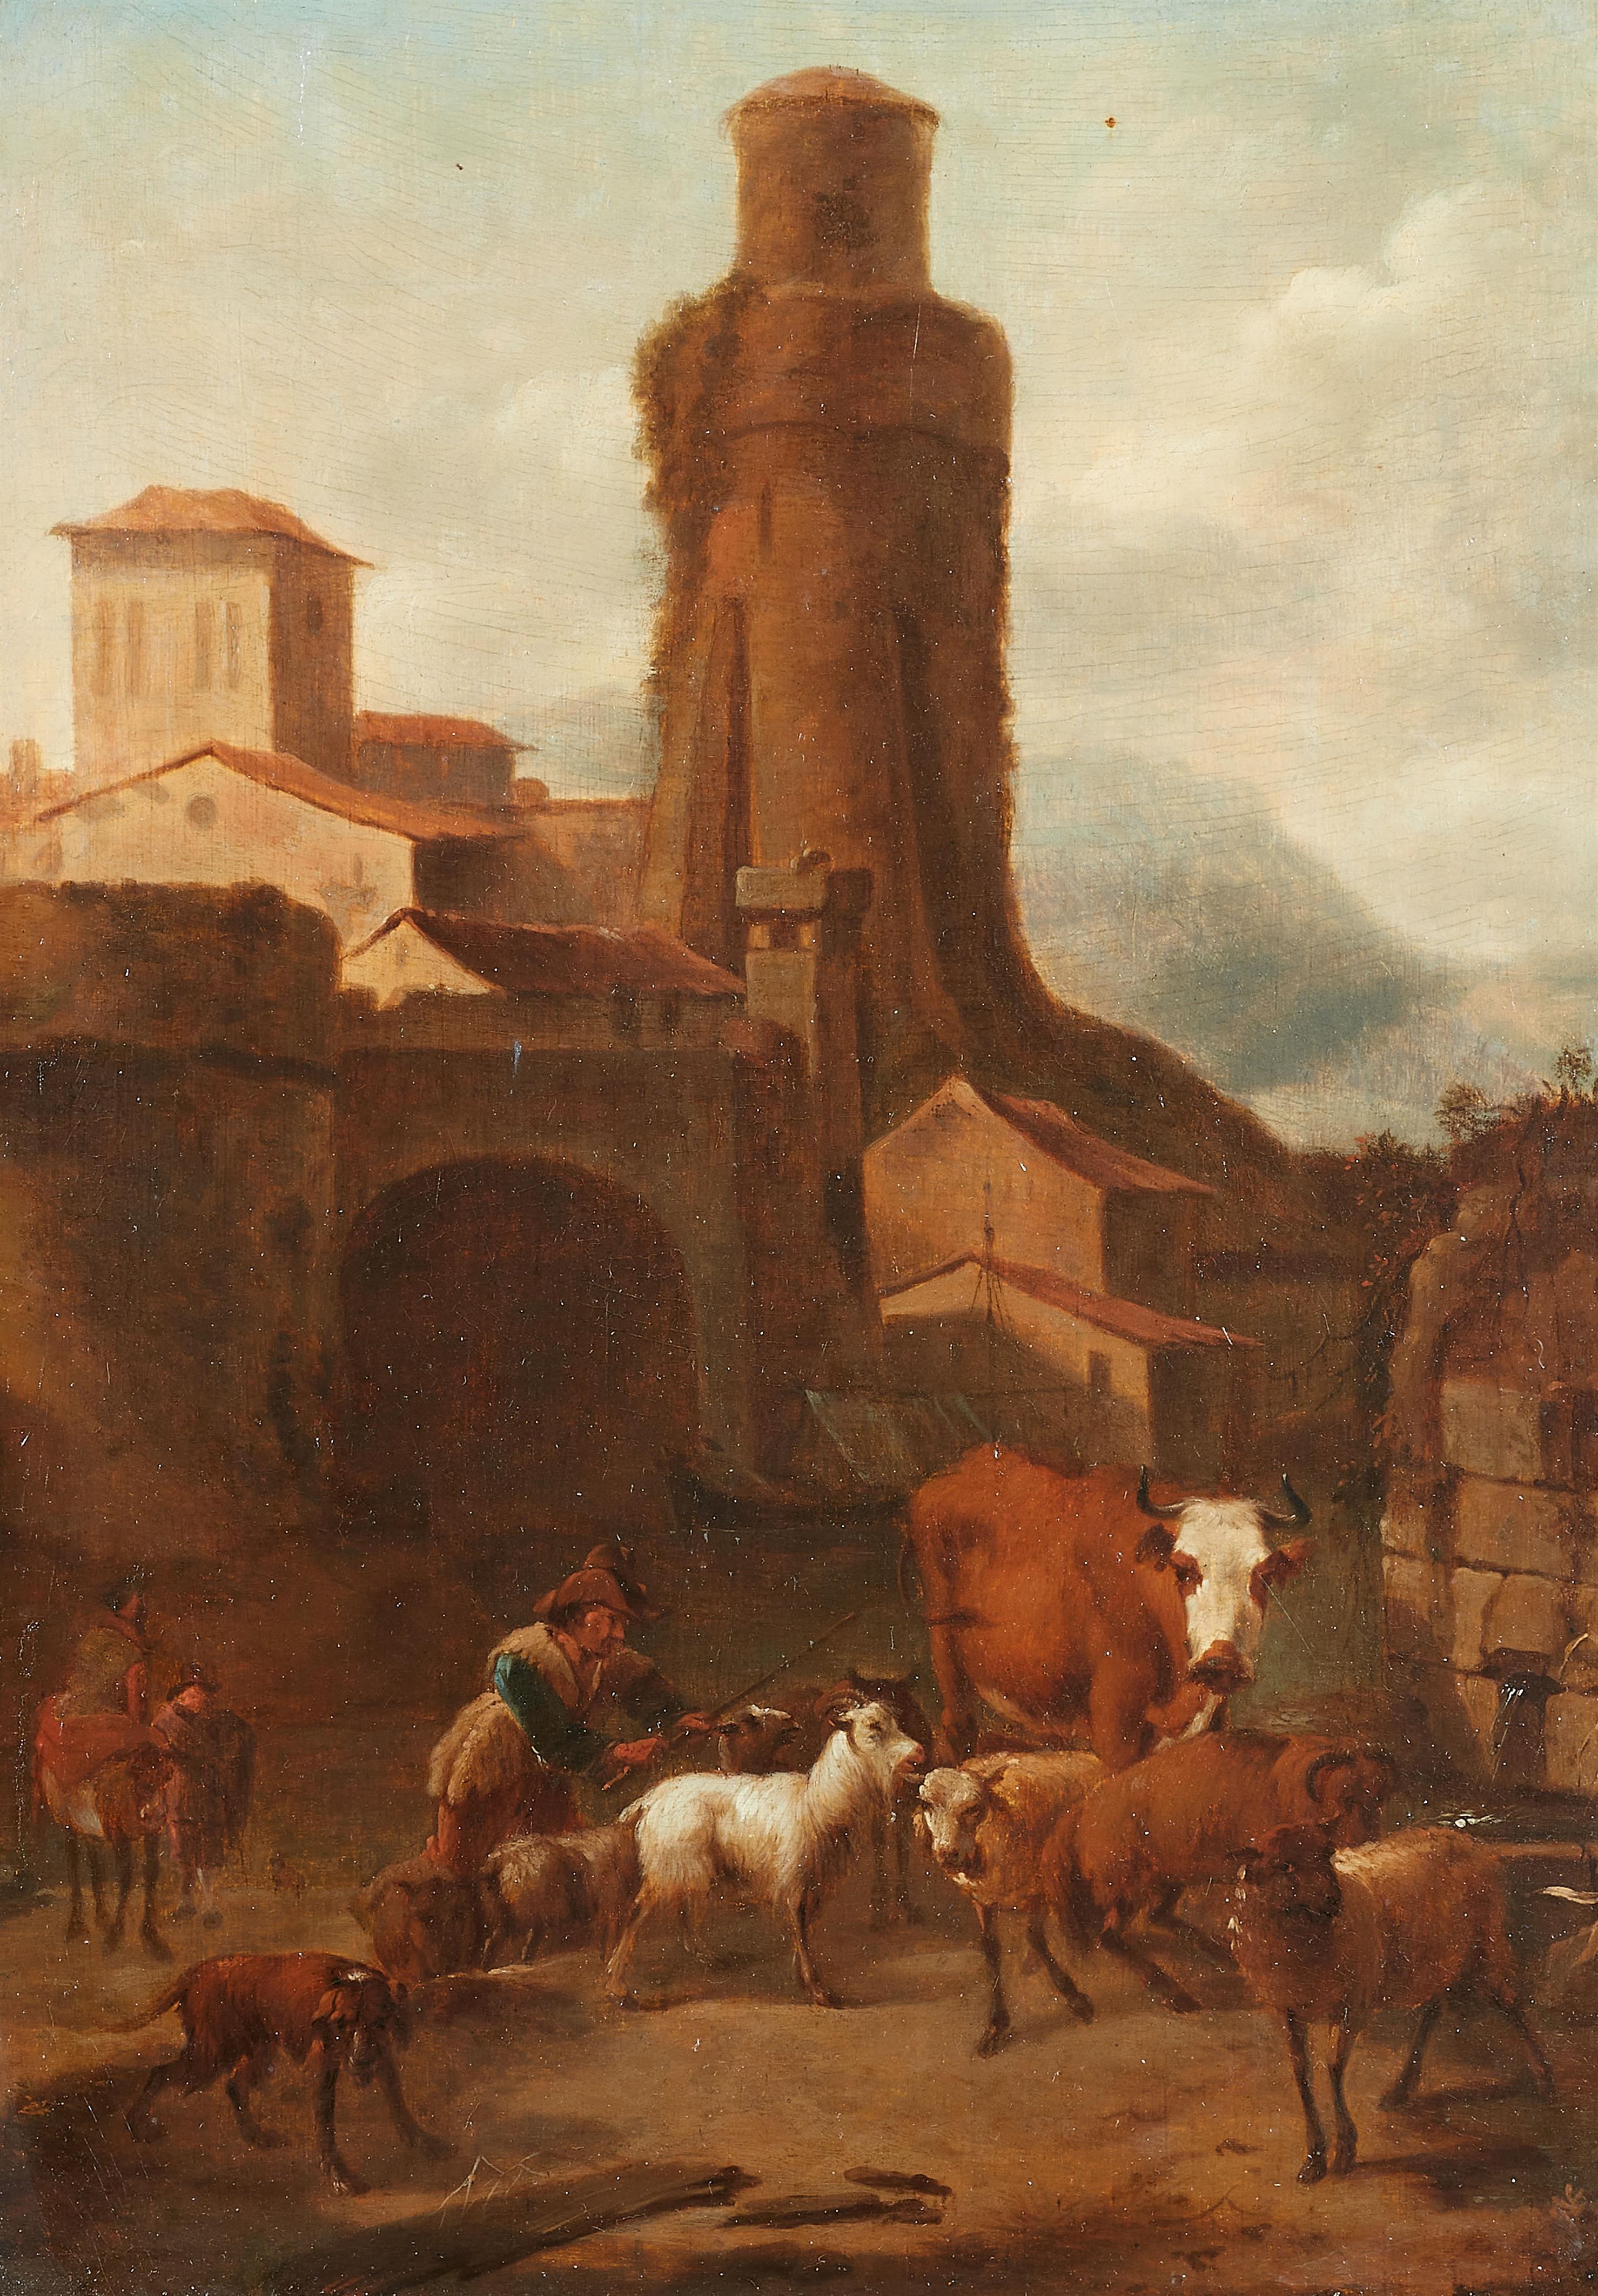 Nicolaes Berchem, attributed to - Landscape with Shepherds by a Town - image-1